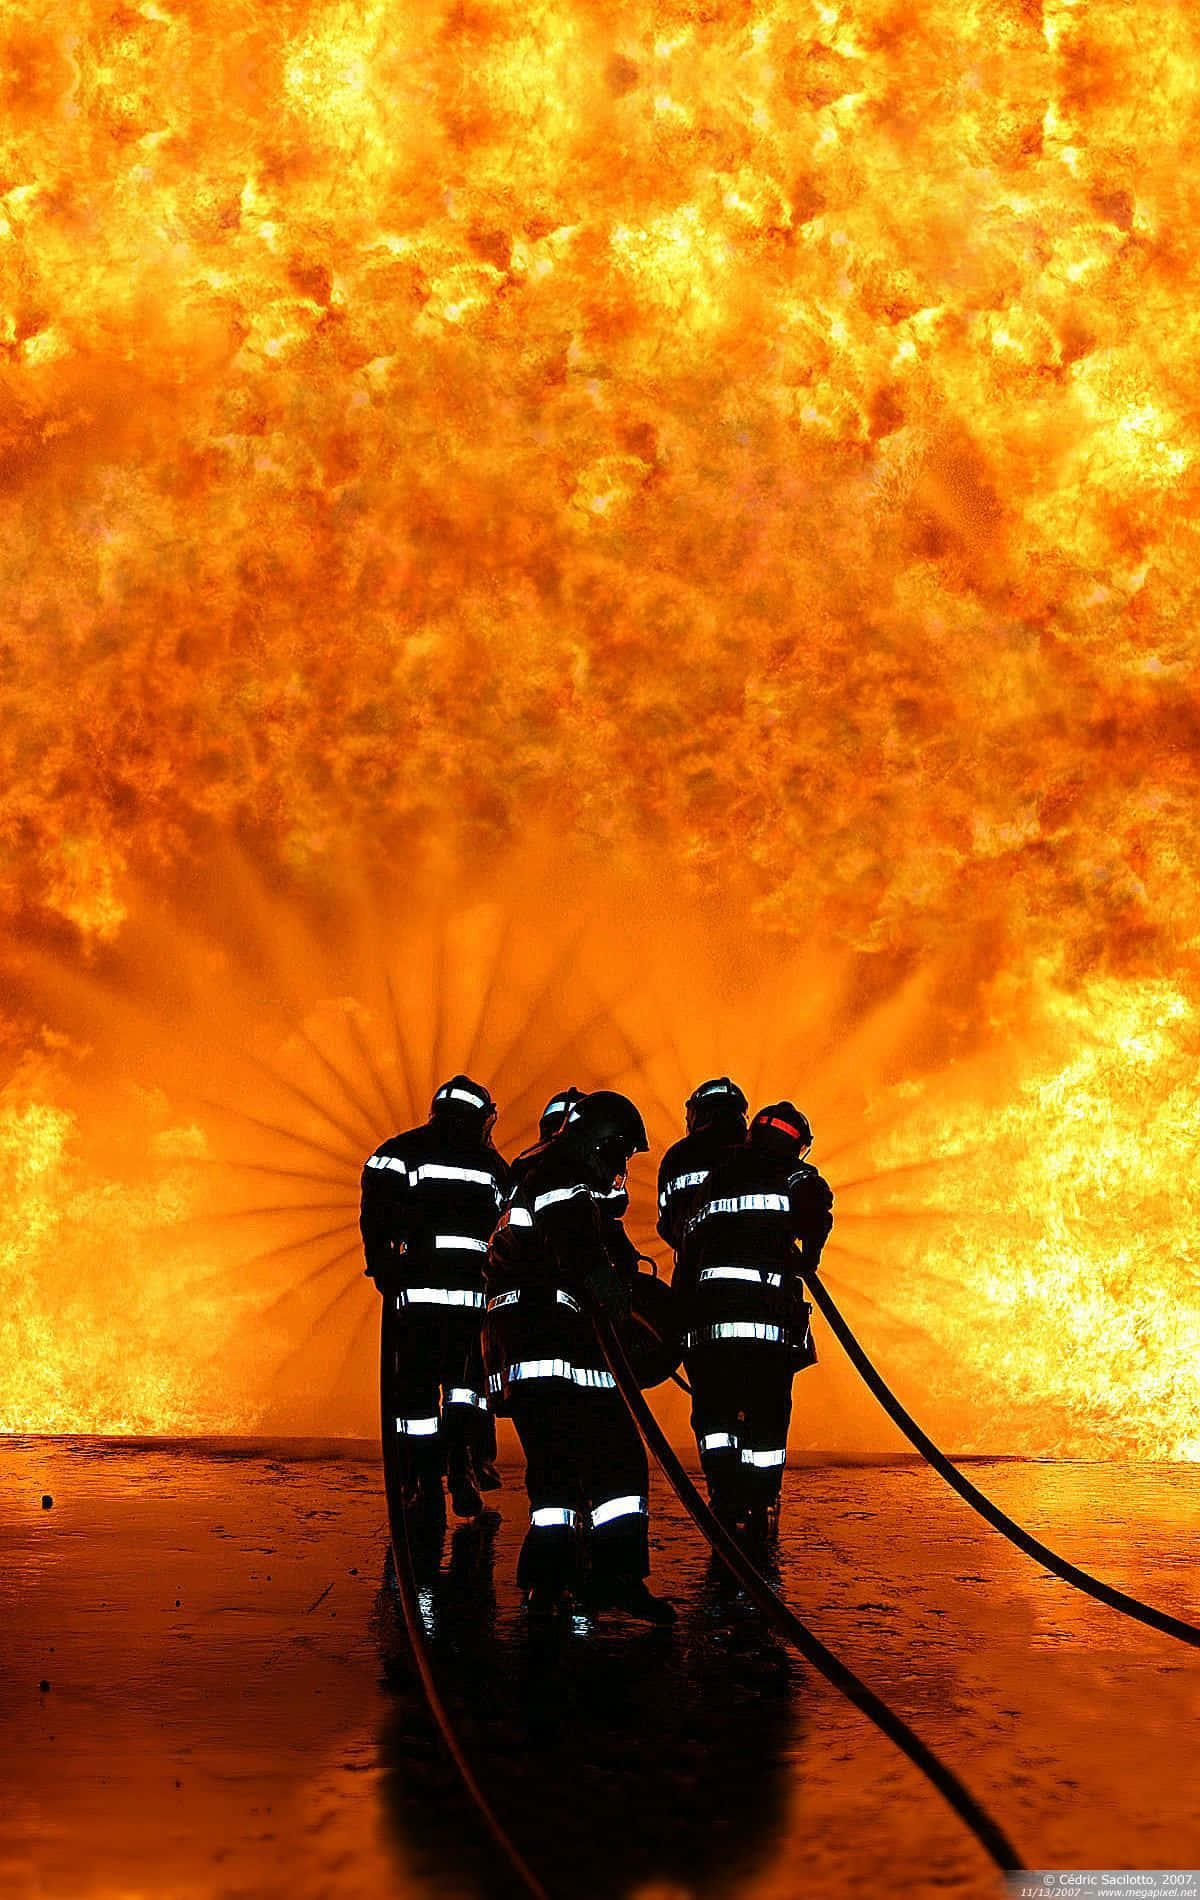 Fire Department With A Huge Fire Wallpaper